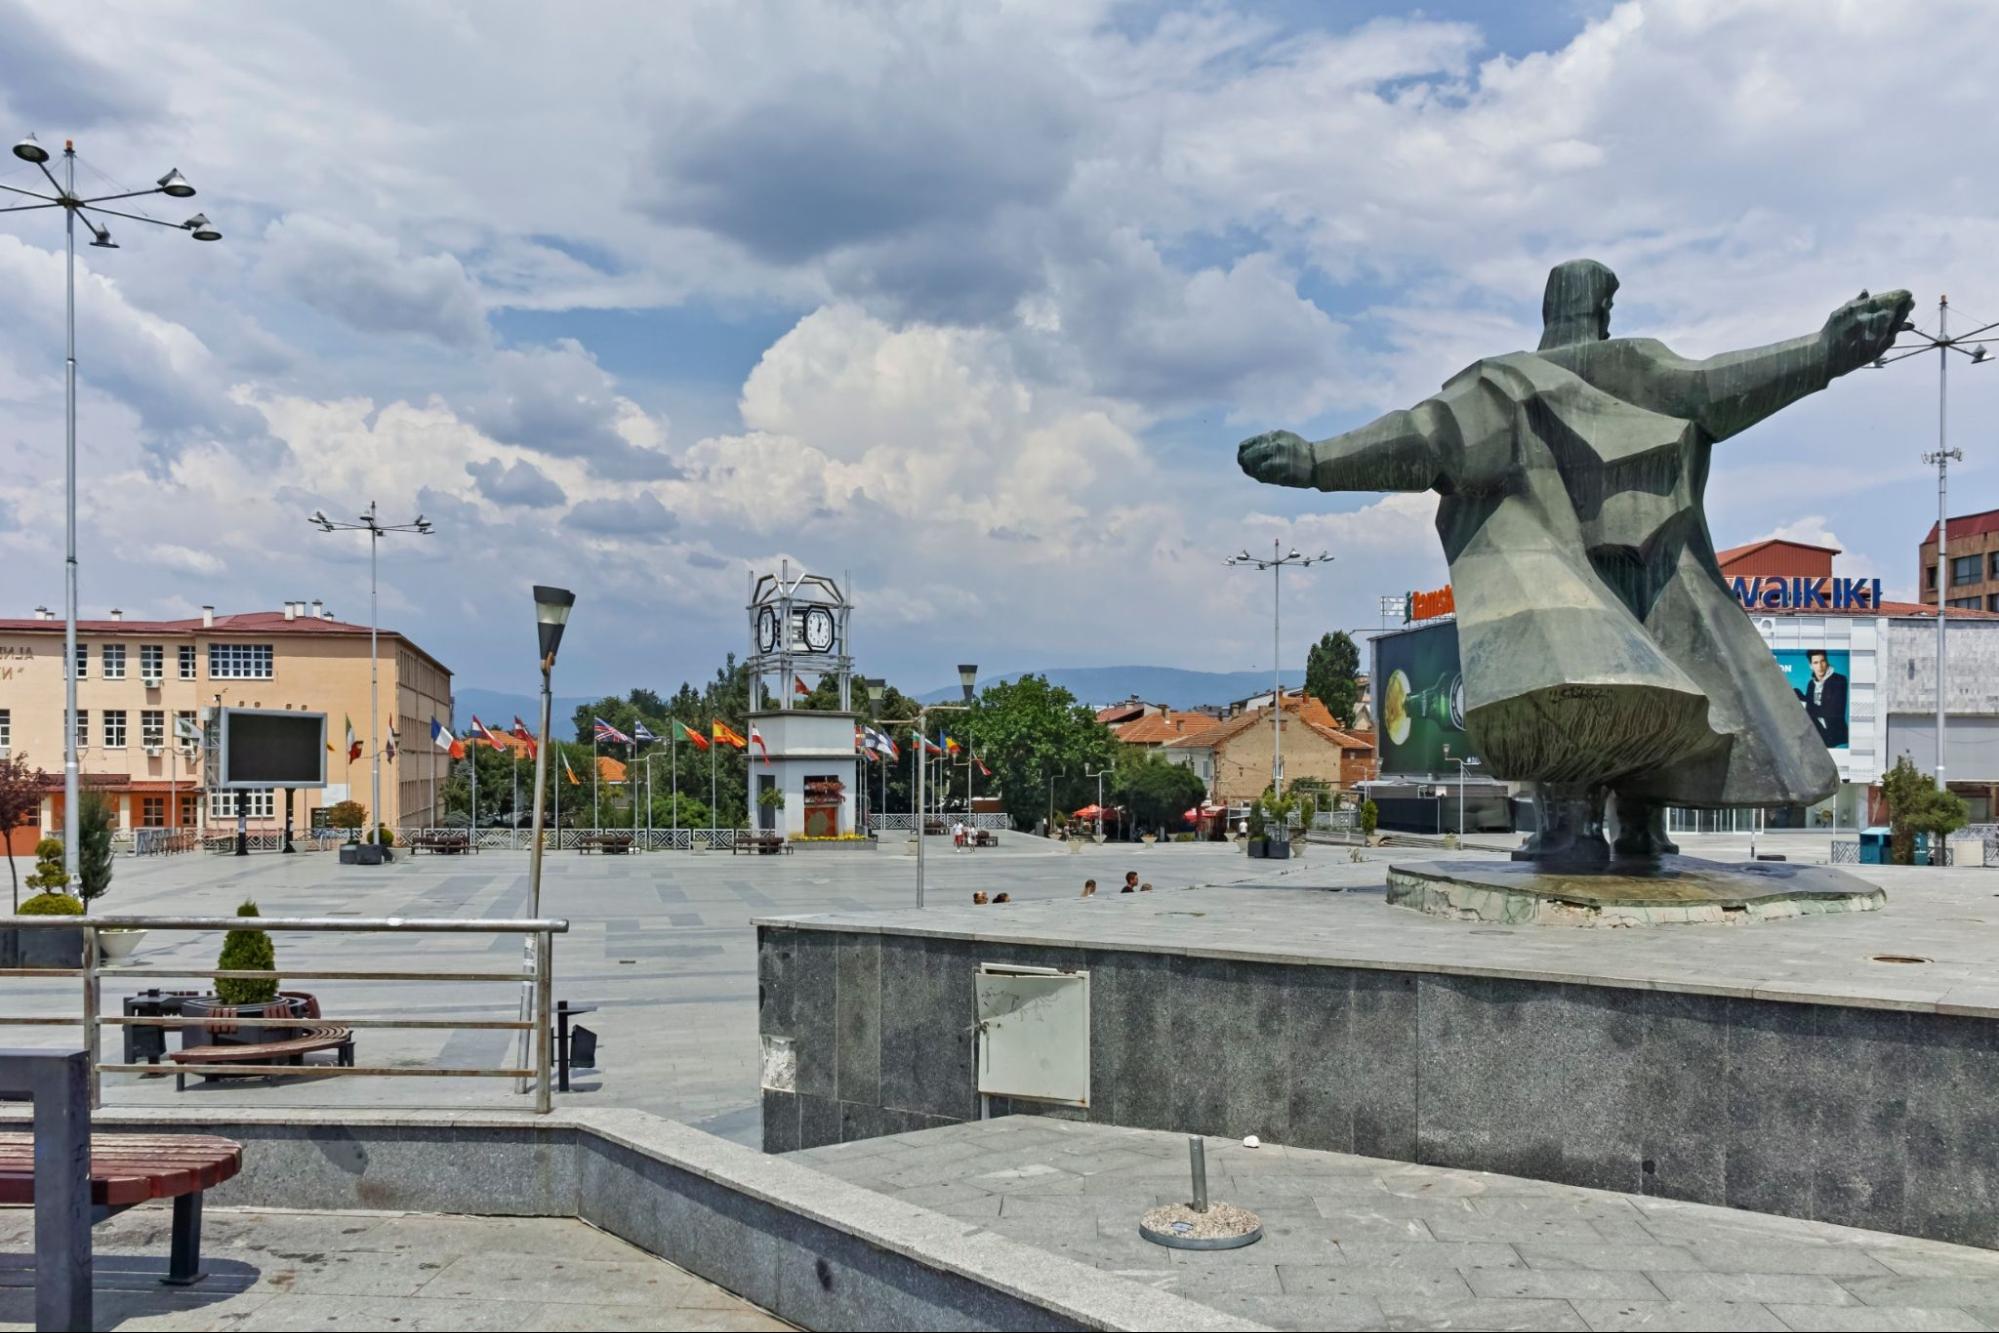 Center of town of Strumica, Republic of North Macedonia